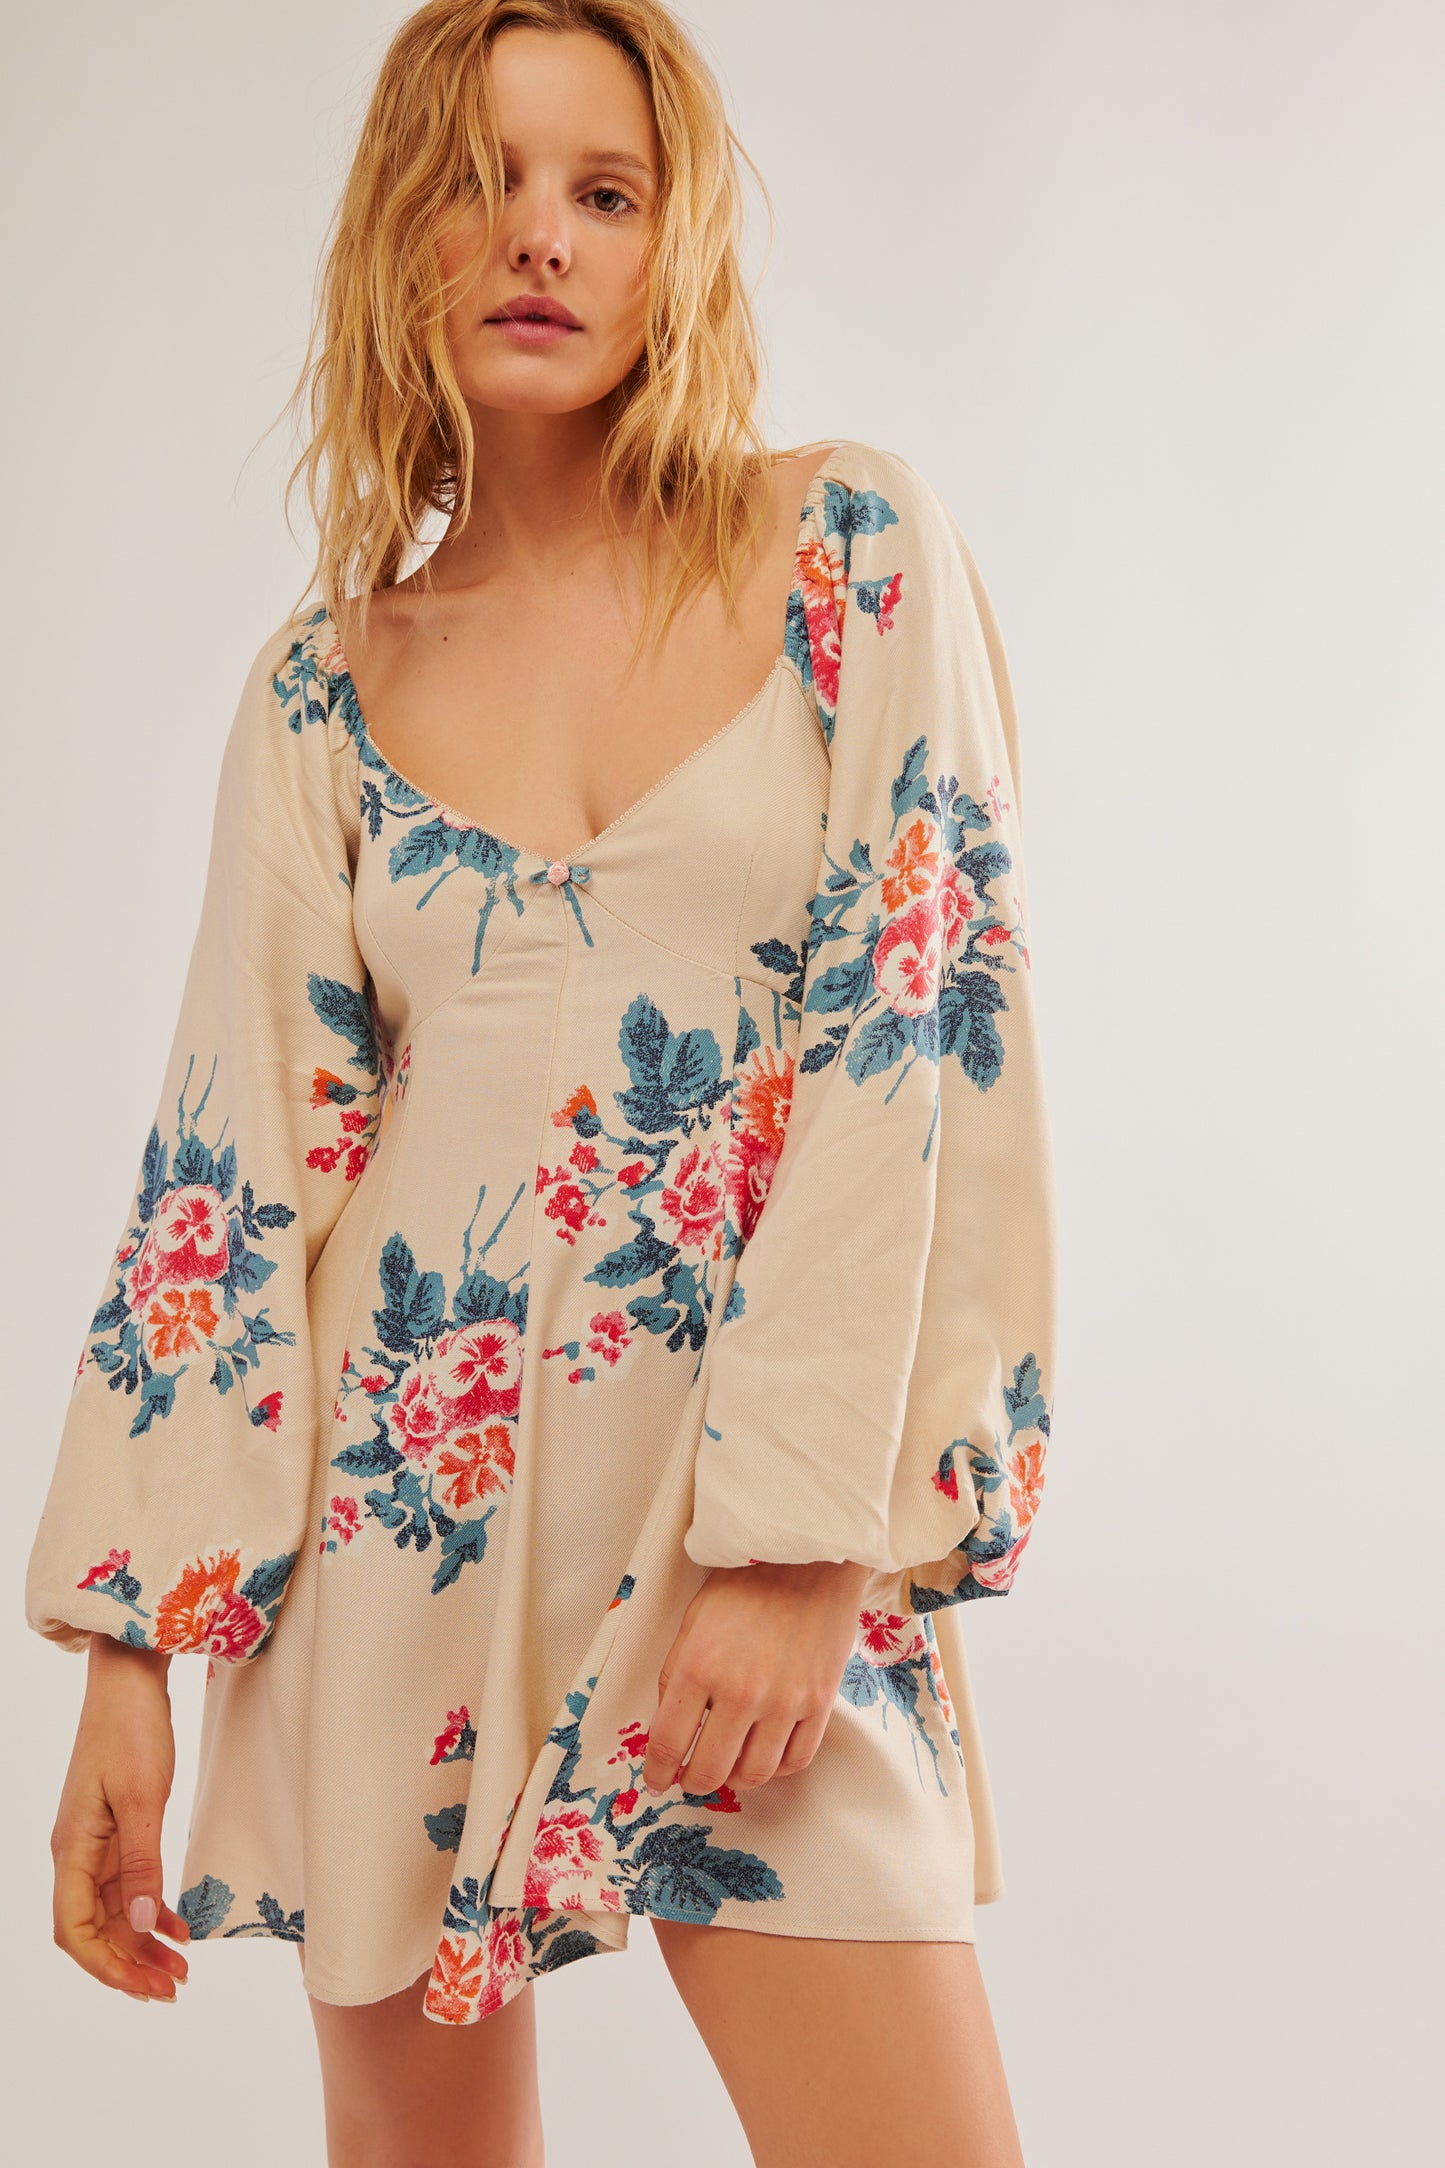 Free People Francesca Mini in the color Warm Ivory Combo